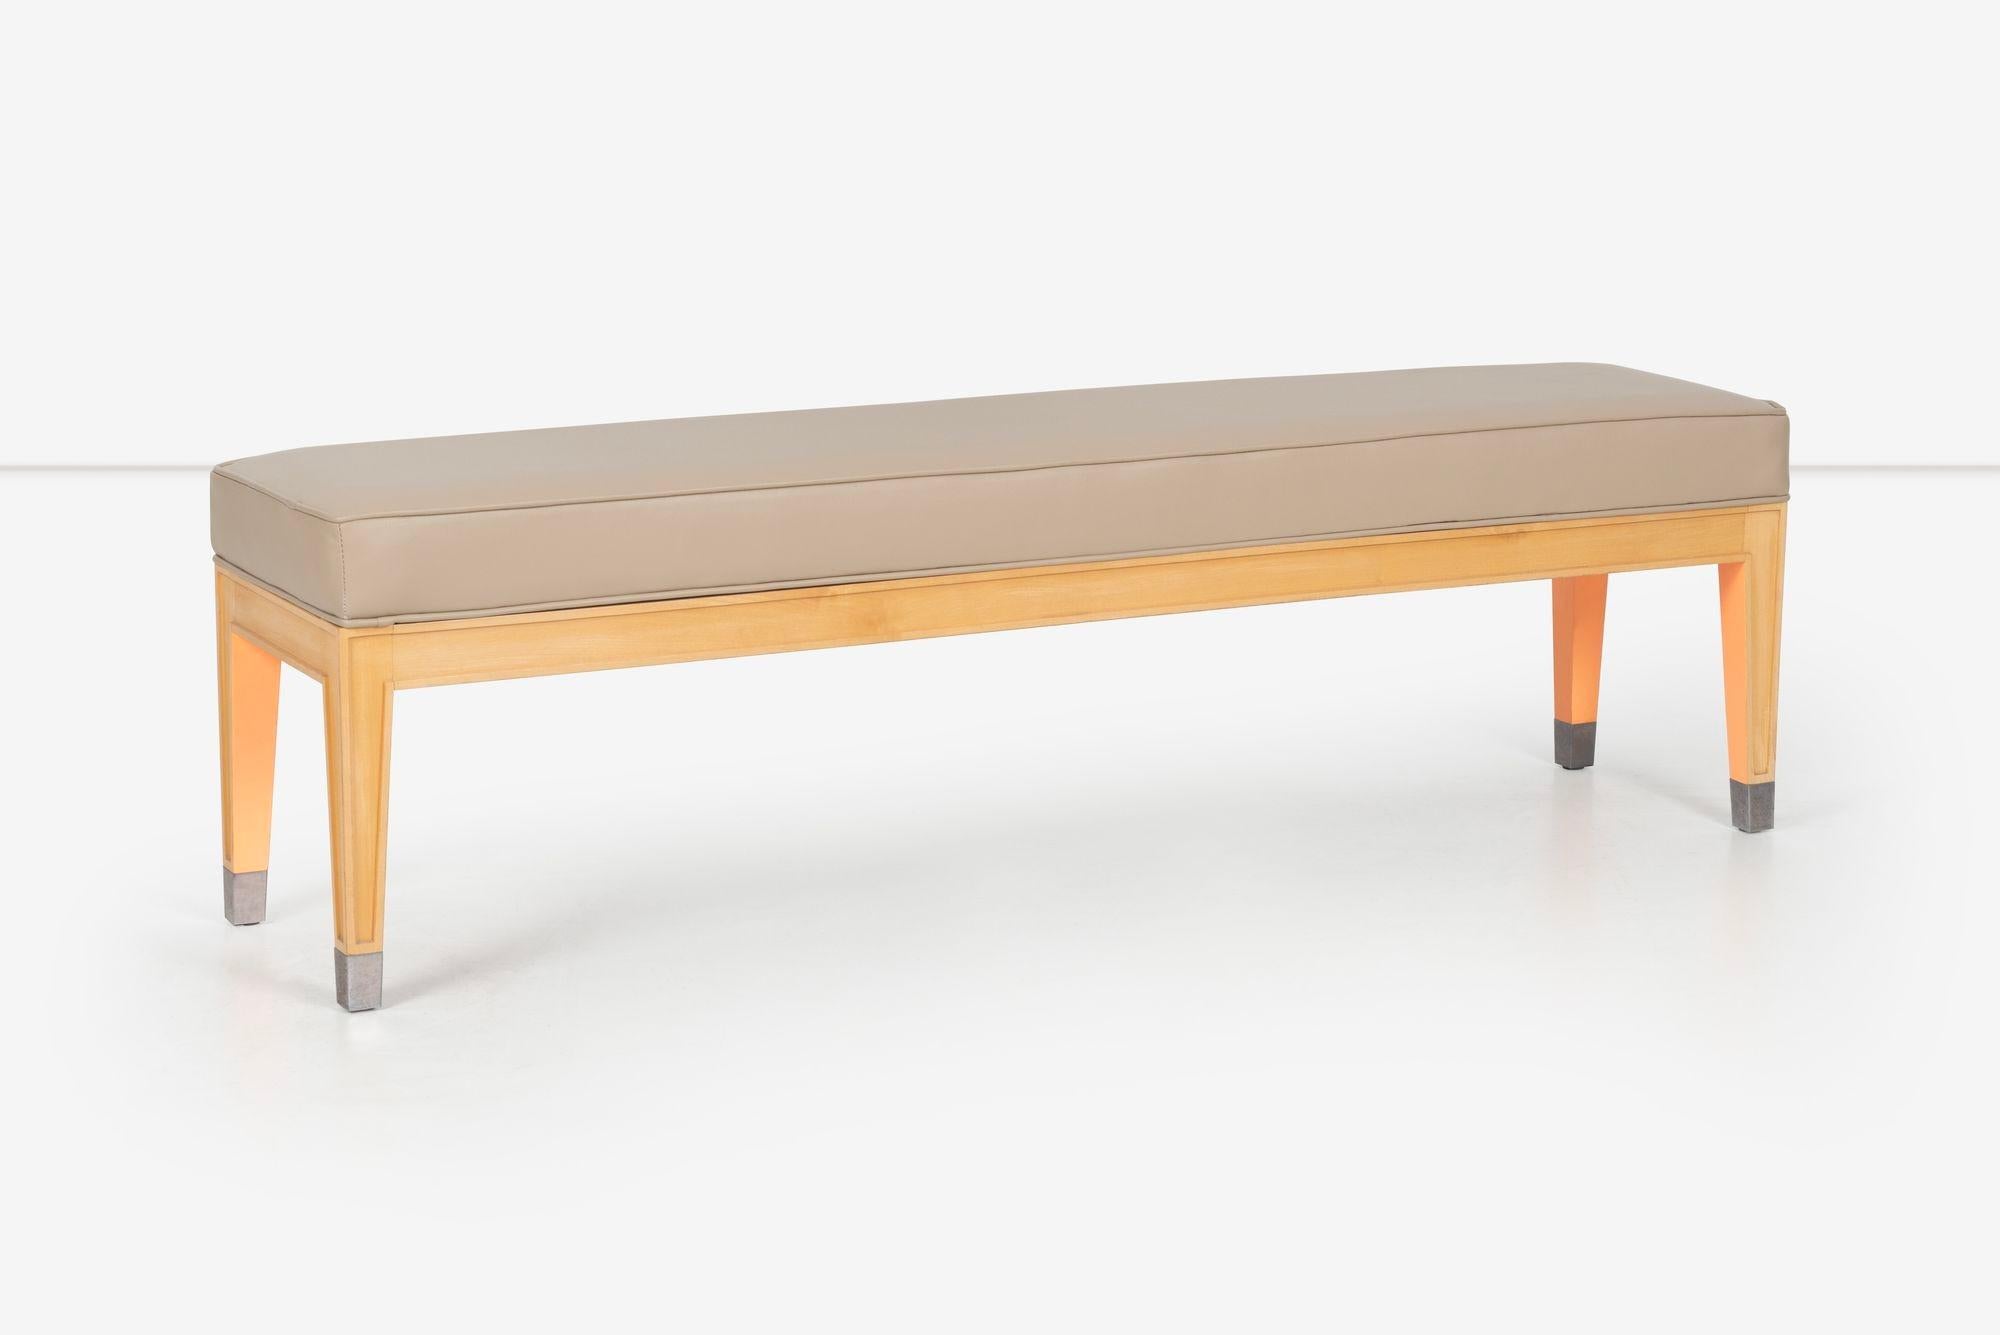 American Phillipe Starck Bench from The Clift Hotel San Fransisco C.A. For Sale